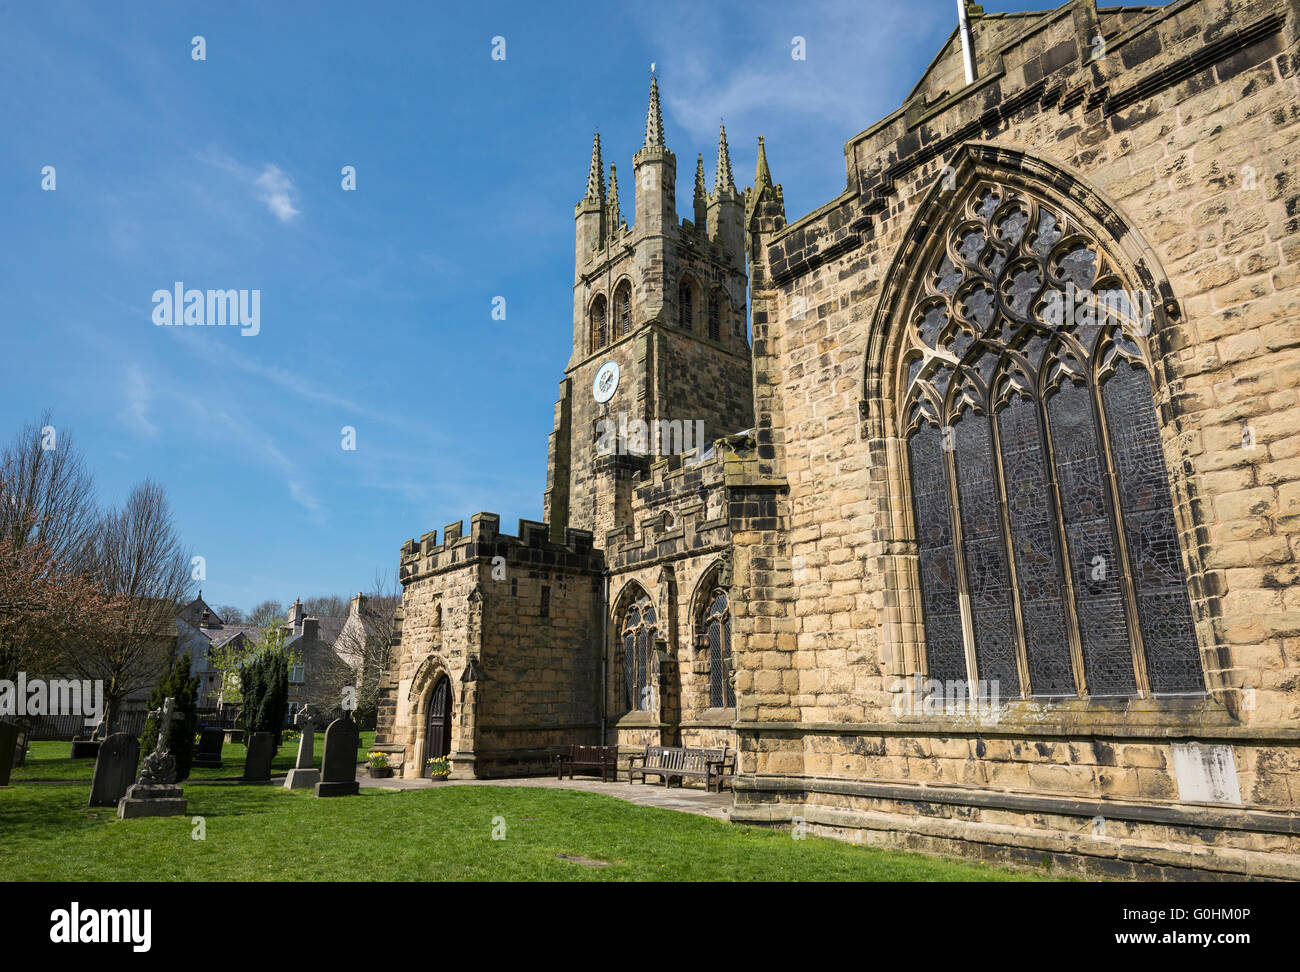 Tideswell church (Cathedral of the Peak) in Derbyshire. A sunny spring day. Stock Photo